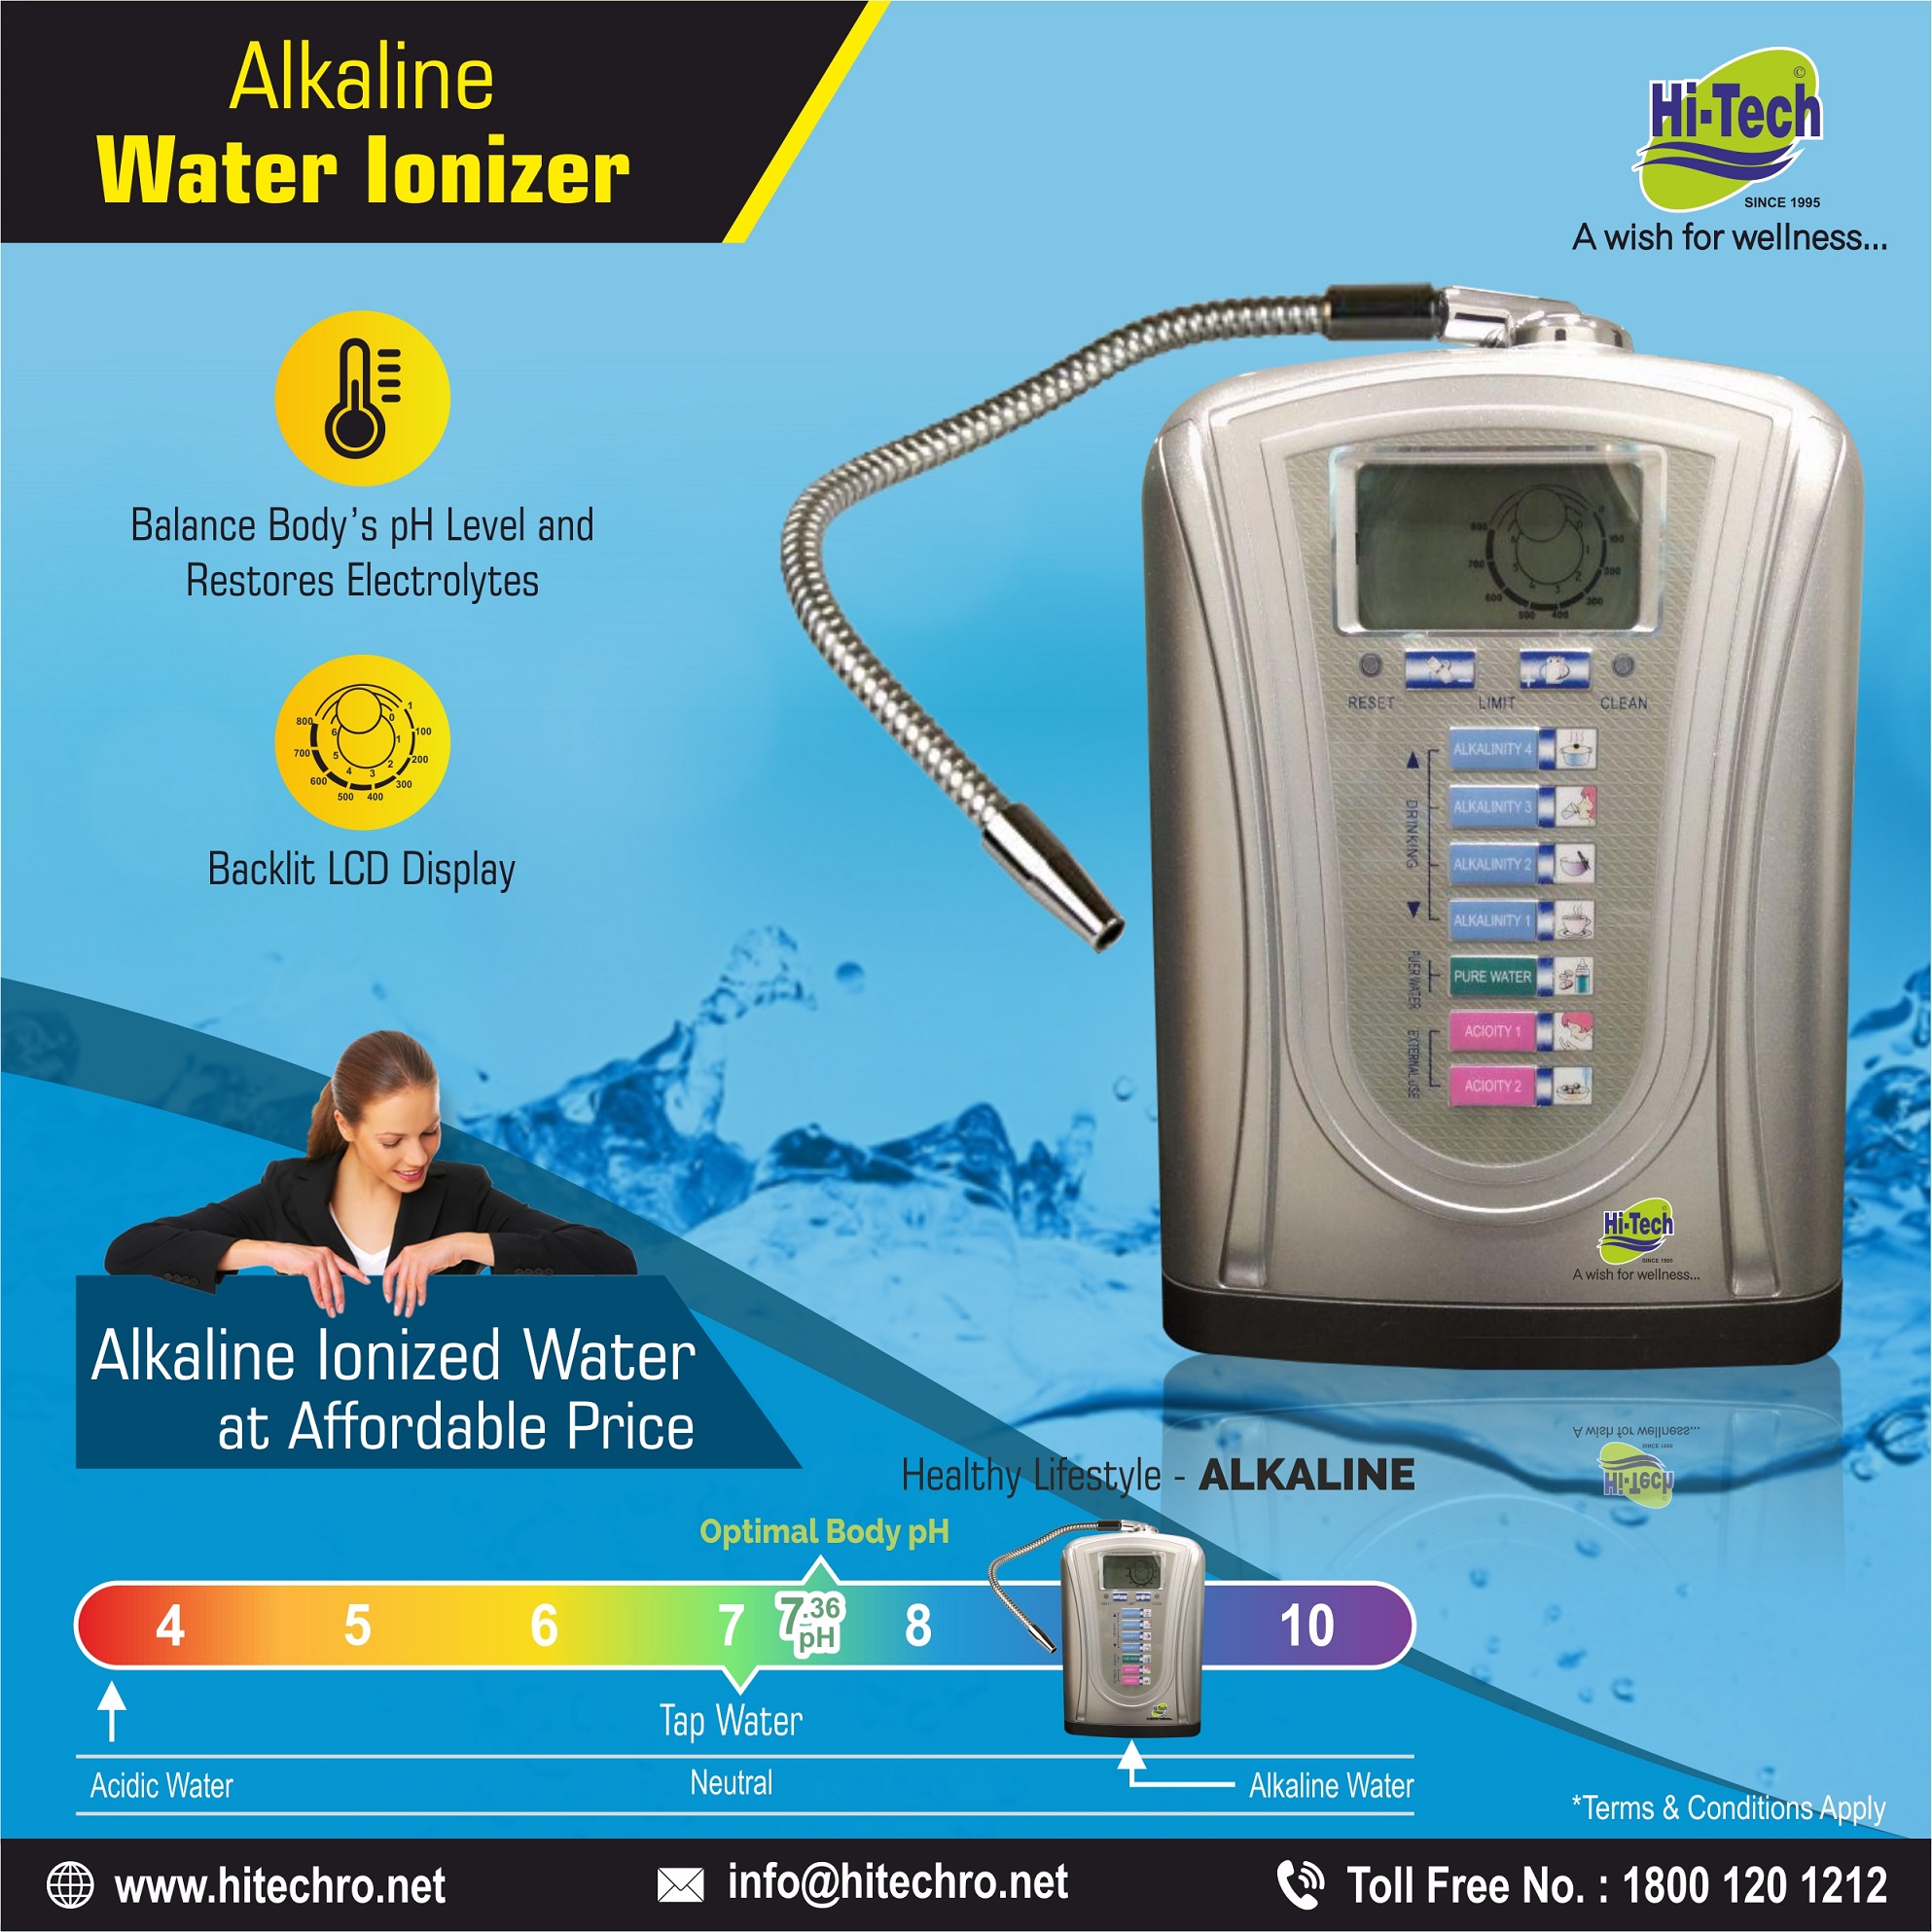 Alkaline Water: Health Benefits, Safety and possible side Effects